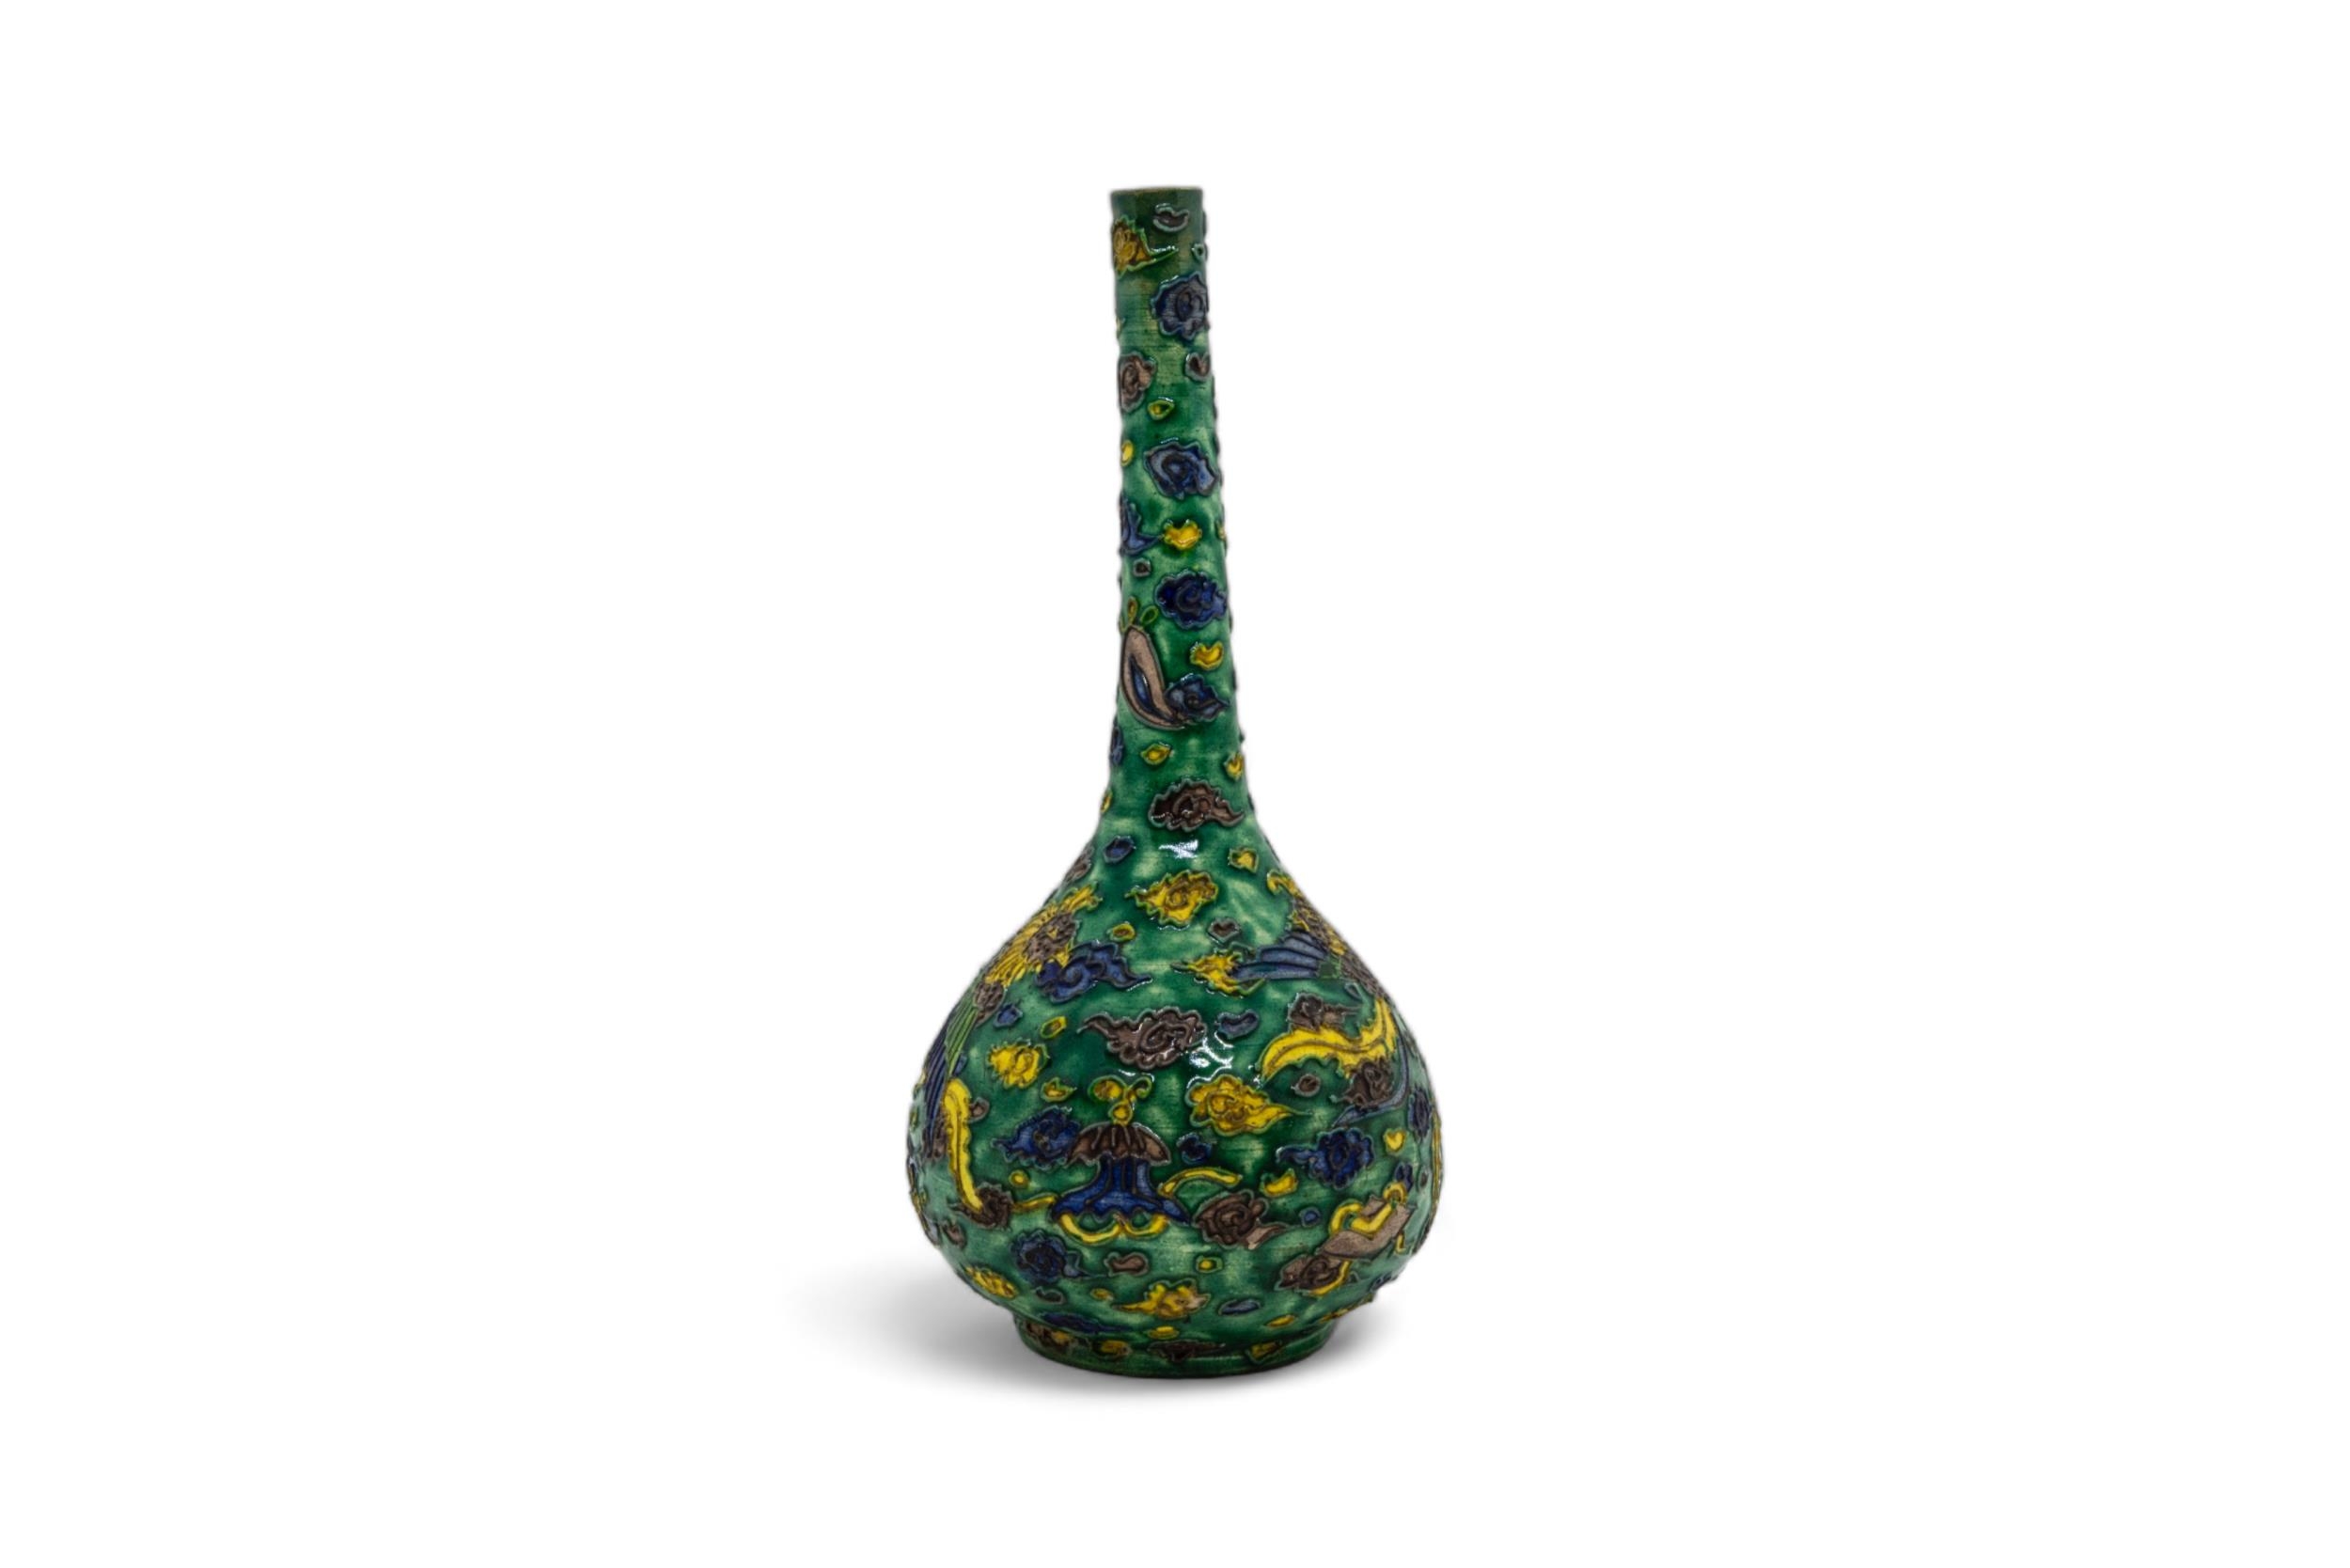 A GROUP OF FIVE JAPANESE PORCELAIN VASES 19TH / 20TH CENTURY largest, 46cm high, smallest, 24cm - Image 5 of 9